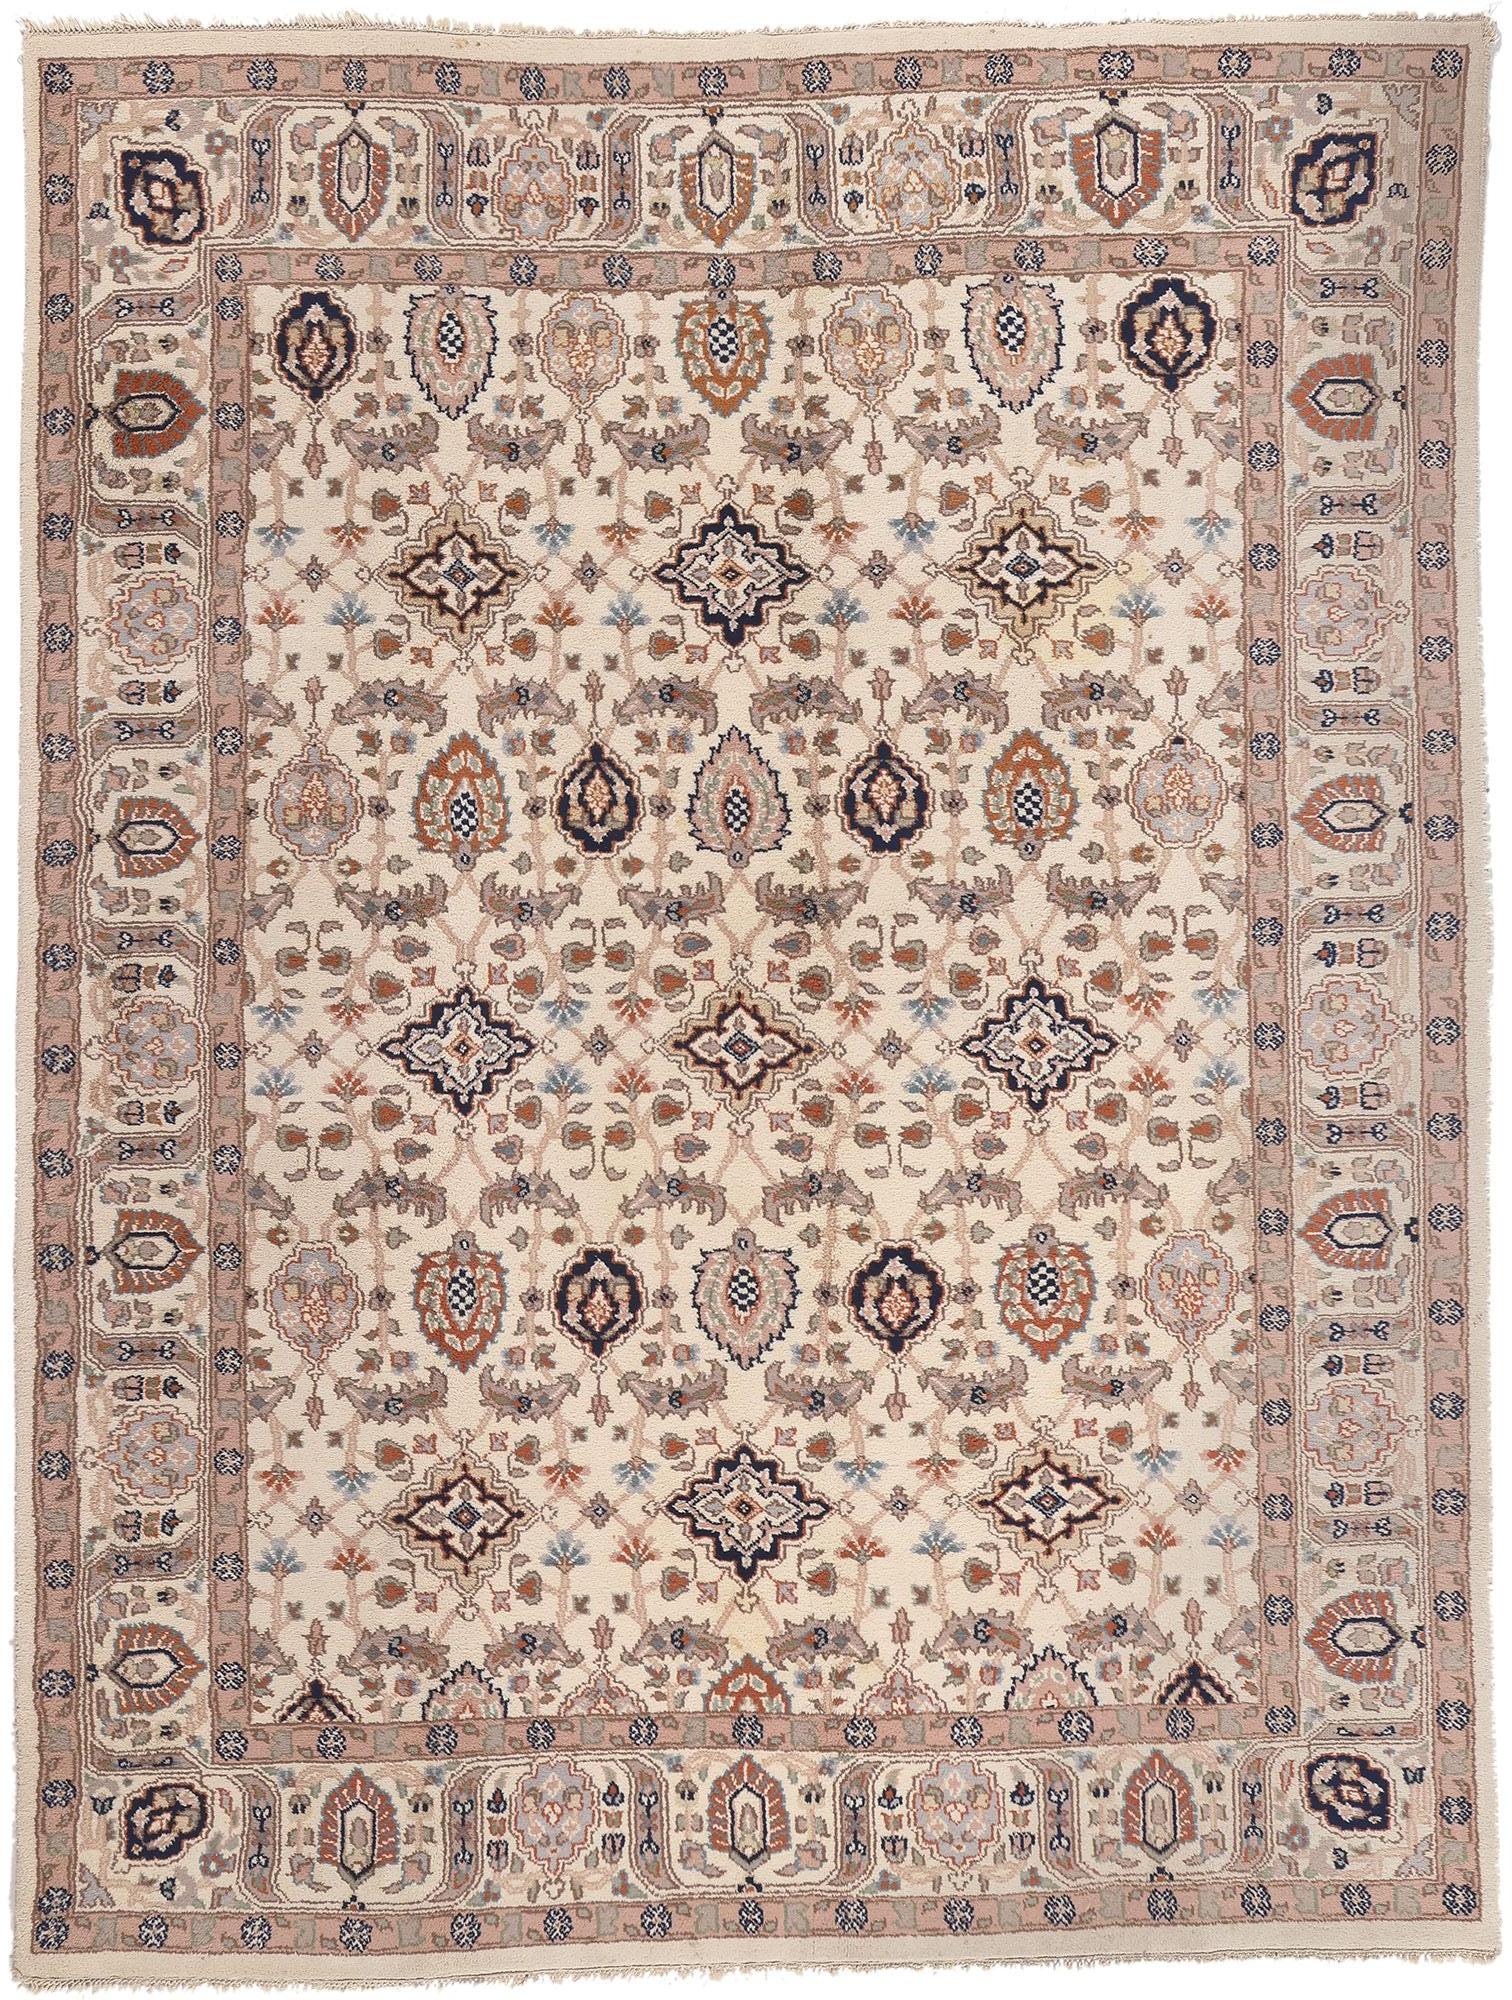 Vintage Indian Tabriz Rug, William and Mary Style Meets Transitional Design